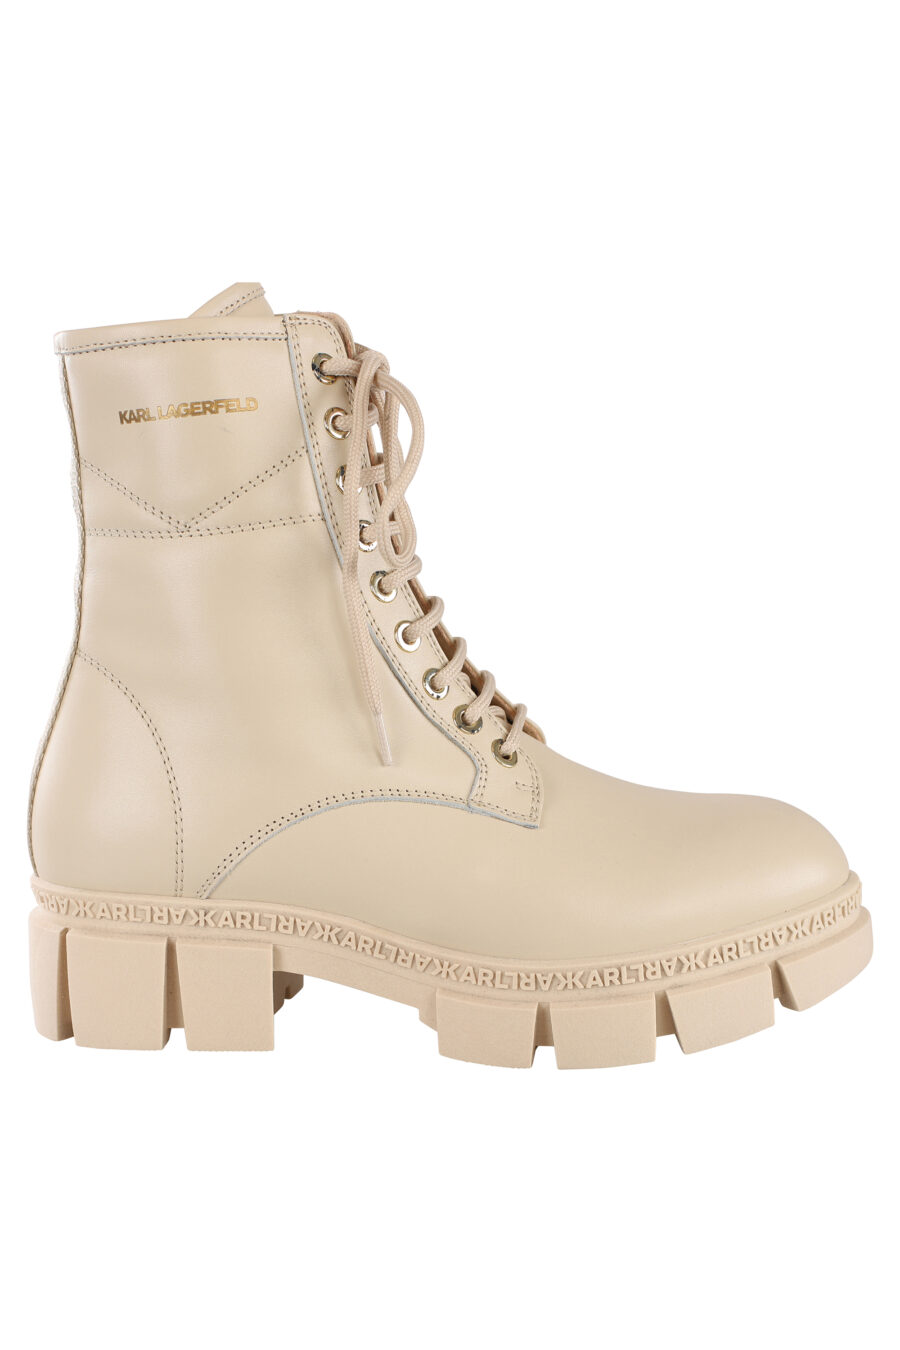 Beige lace-up ankle boots with small gold logo - IMG 6857